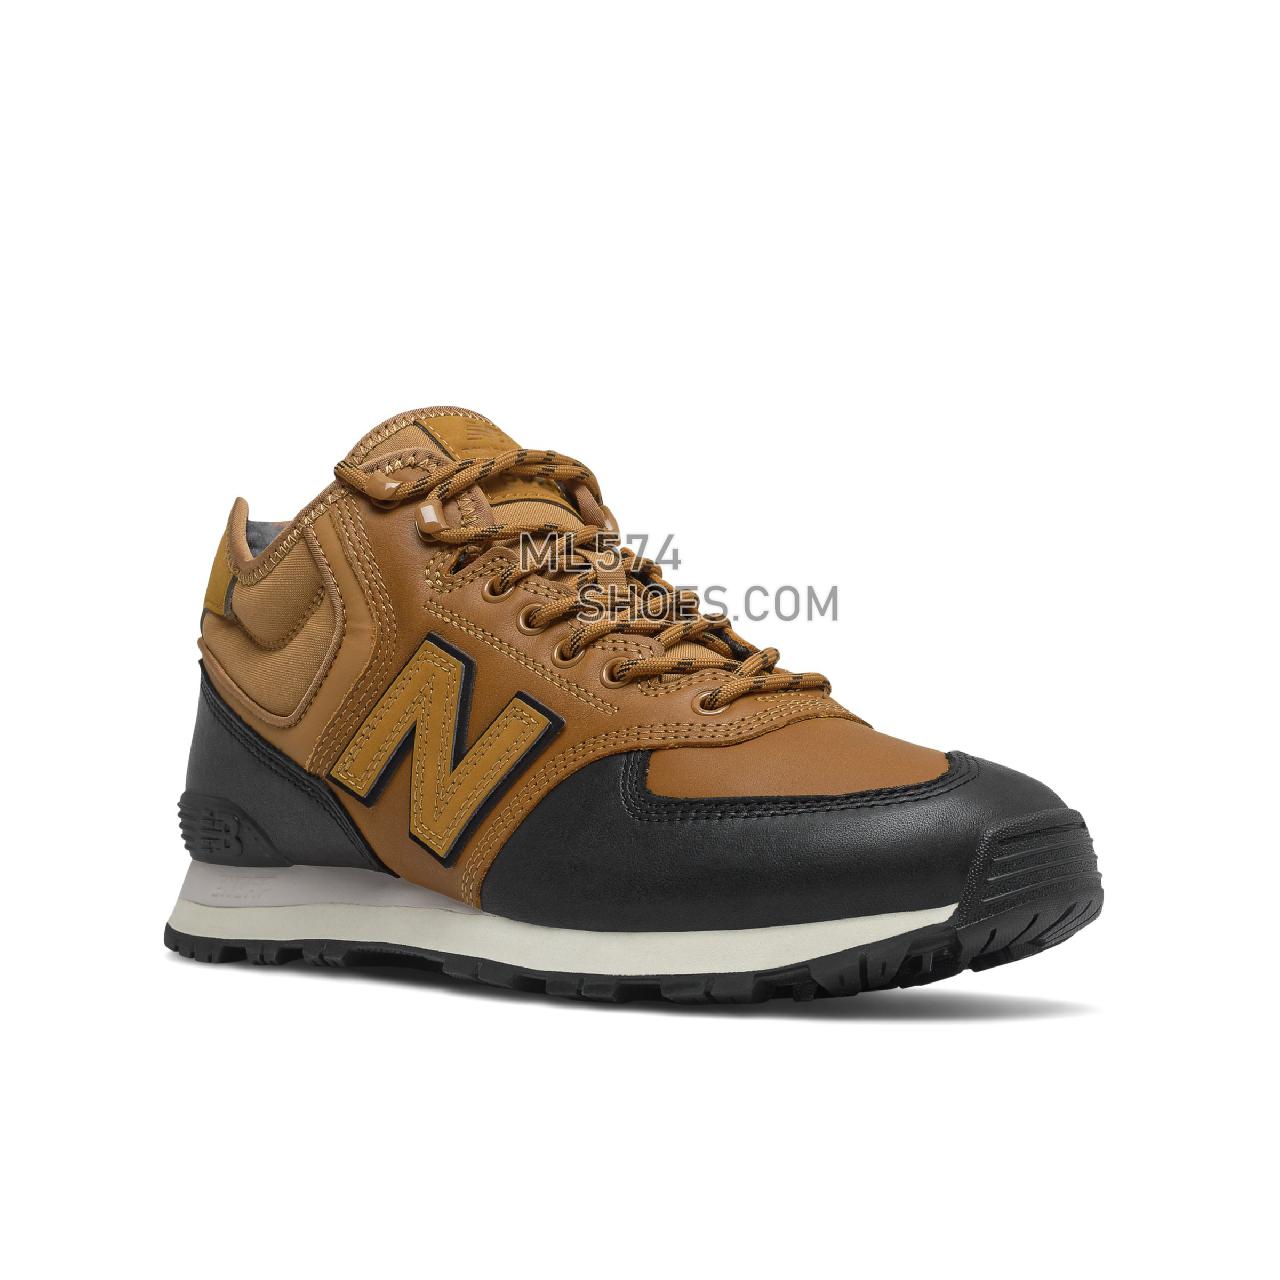 New Balance MH574V1 - Men's Classic Sneakers - Workwear with Black - MH574XB1